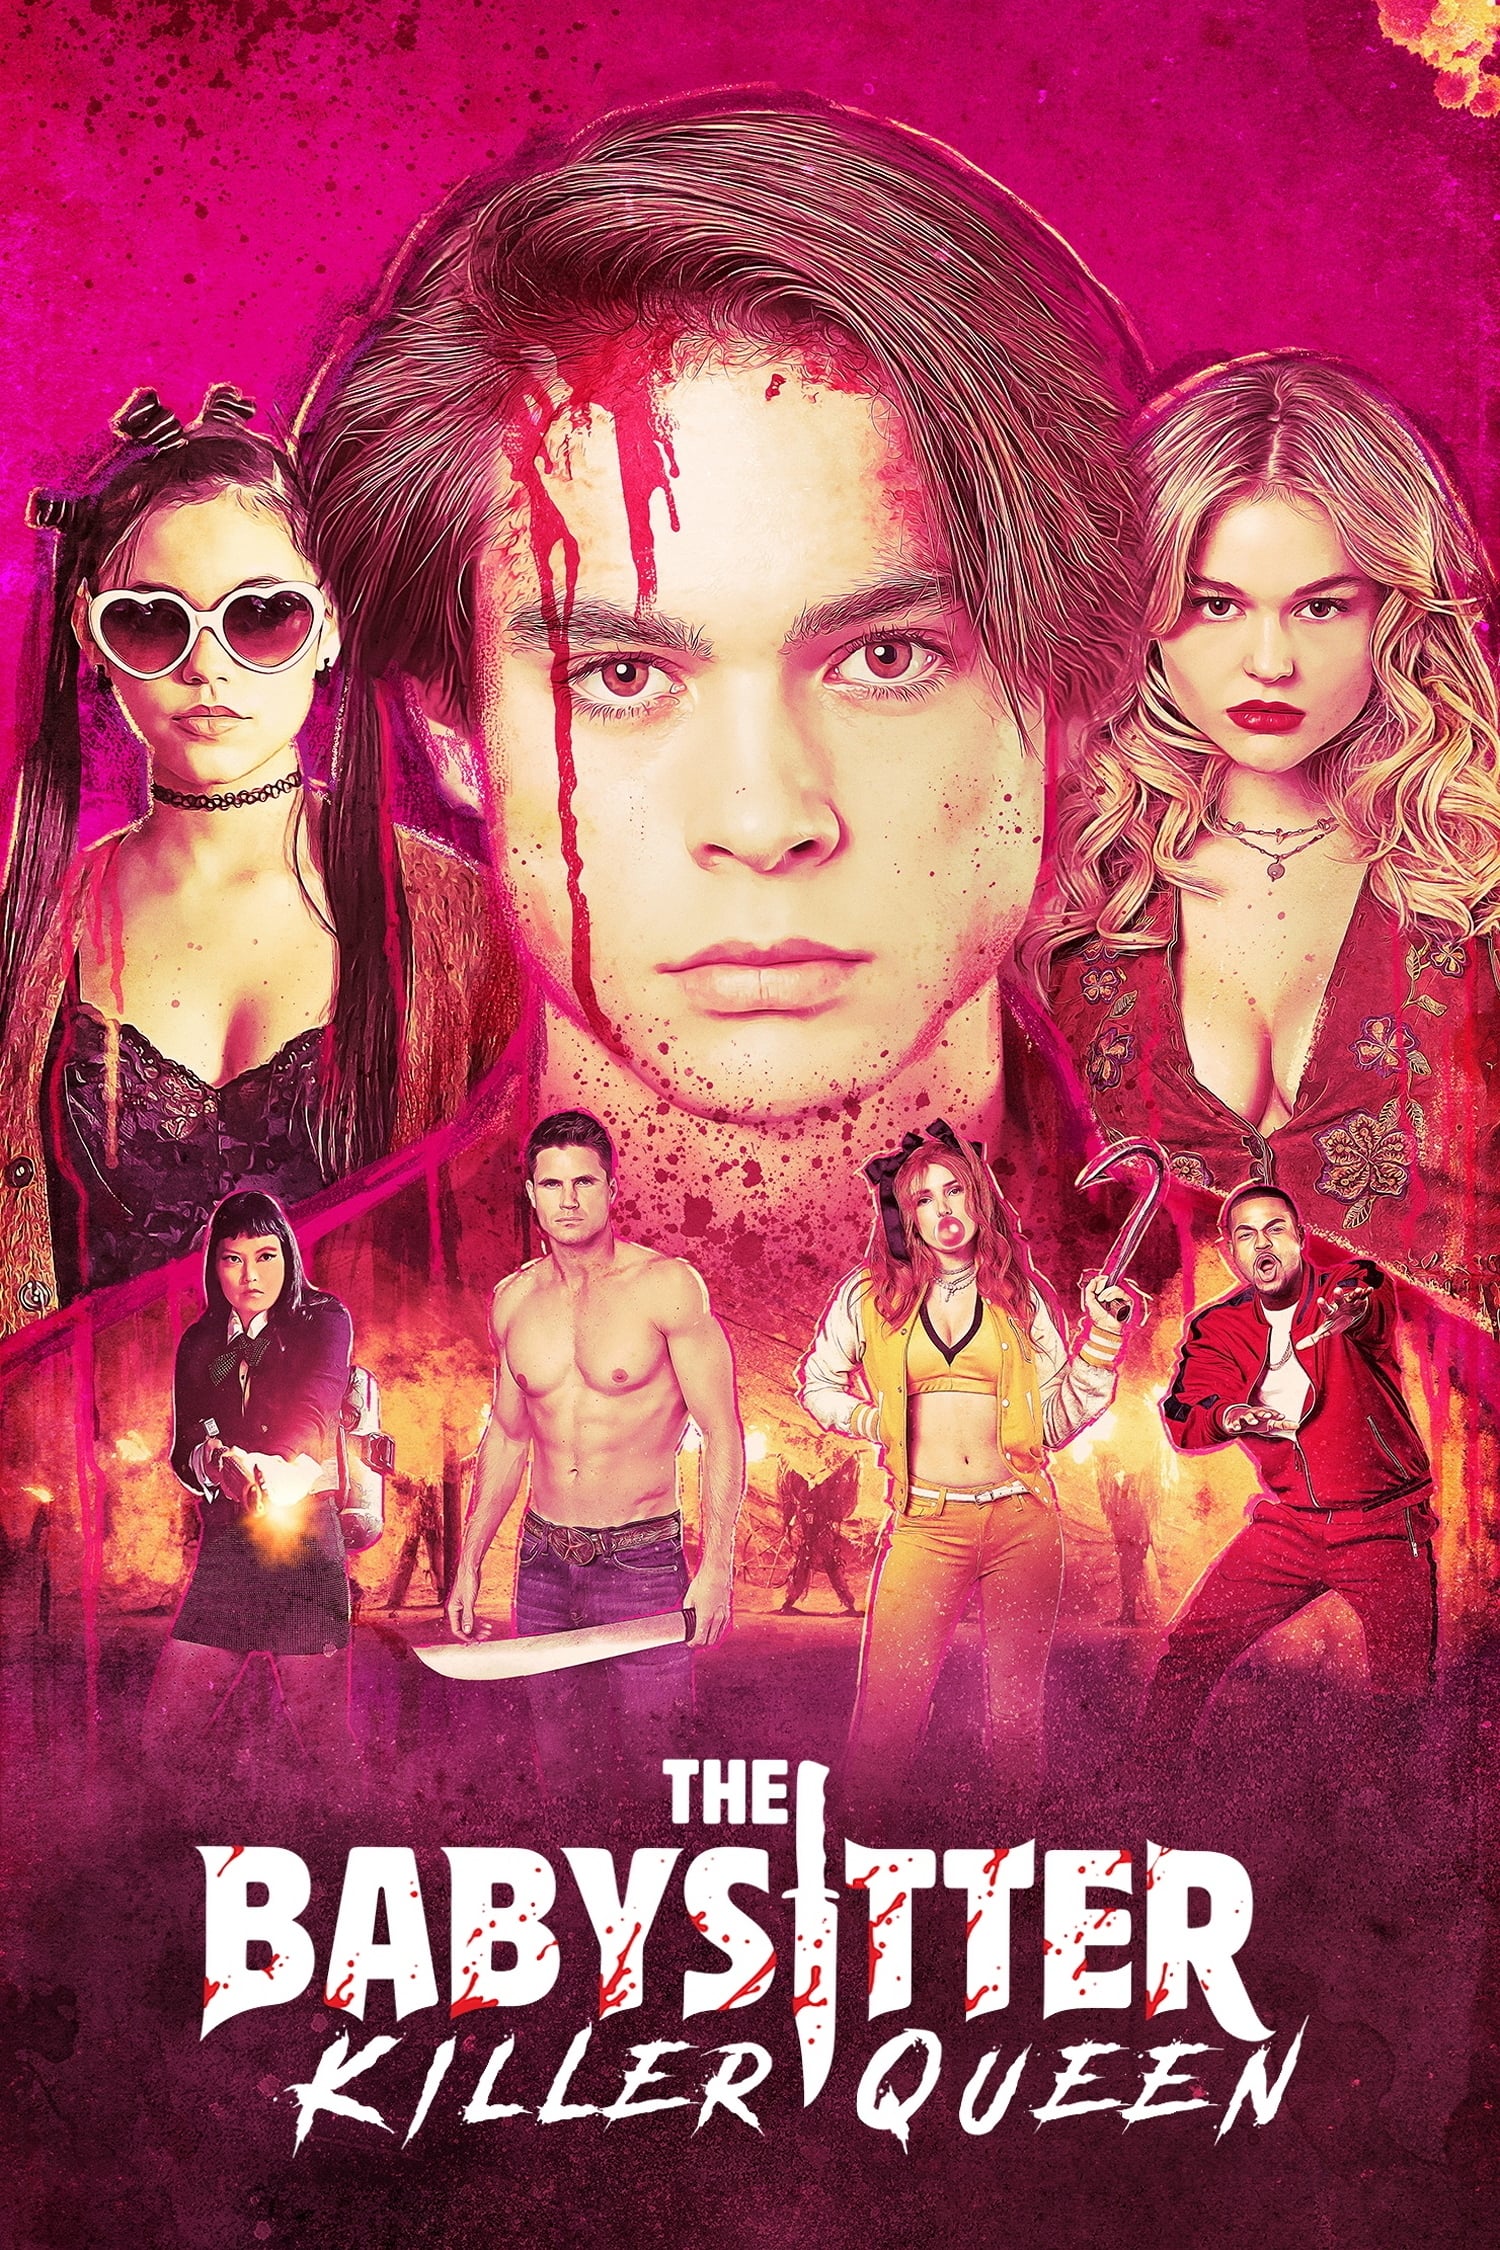 Poster for the movie "The Babysitter: Killer Queen"